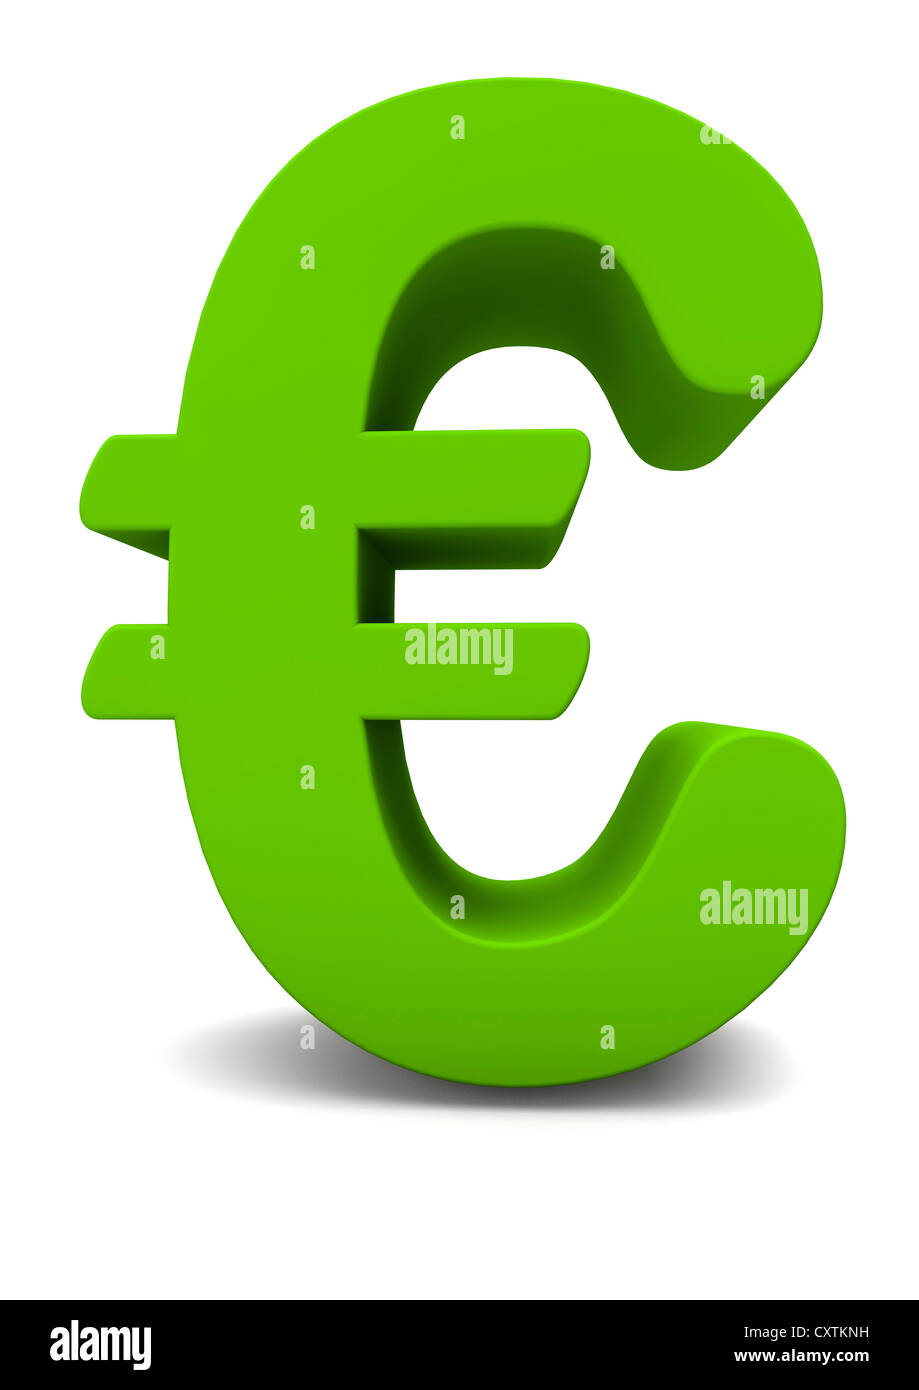 3d Render Of A Green Euro Symbol On White Background Stock Photo Alamy